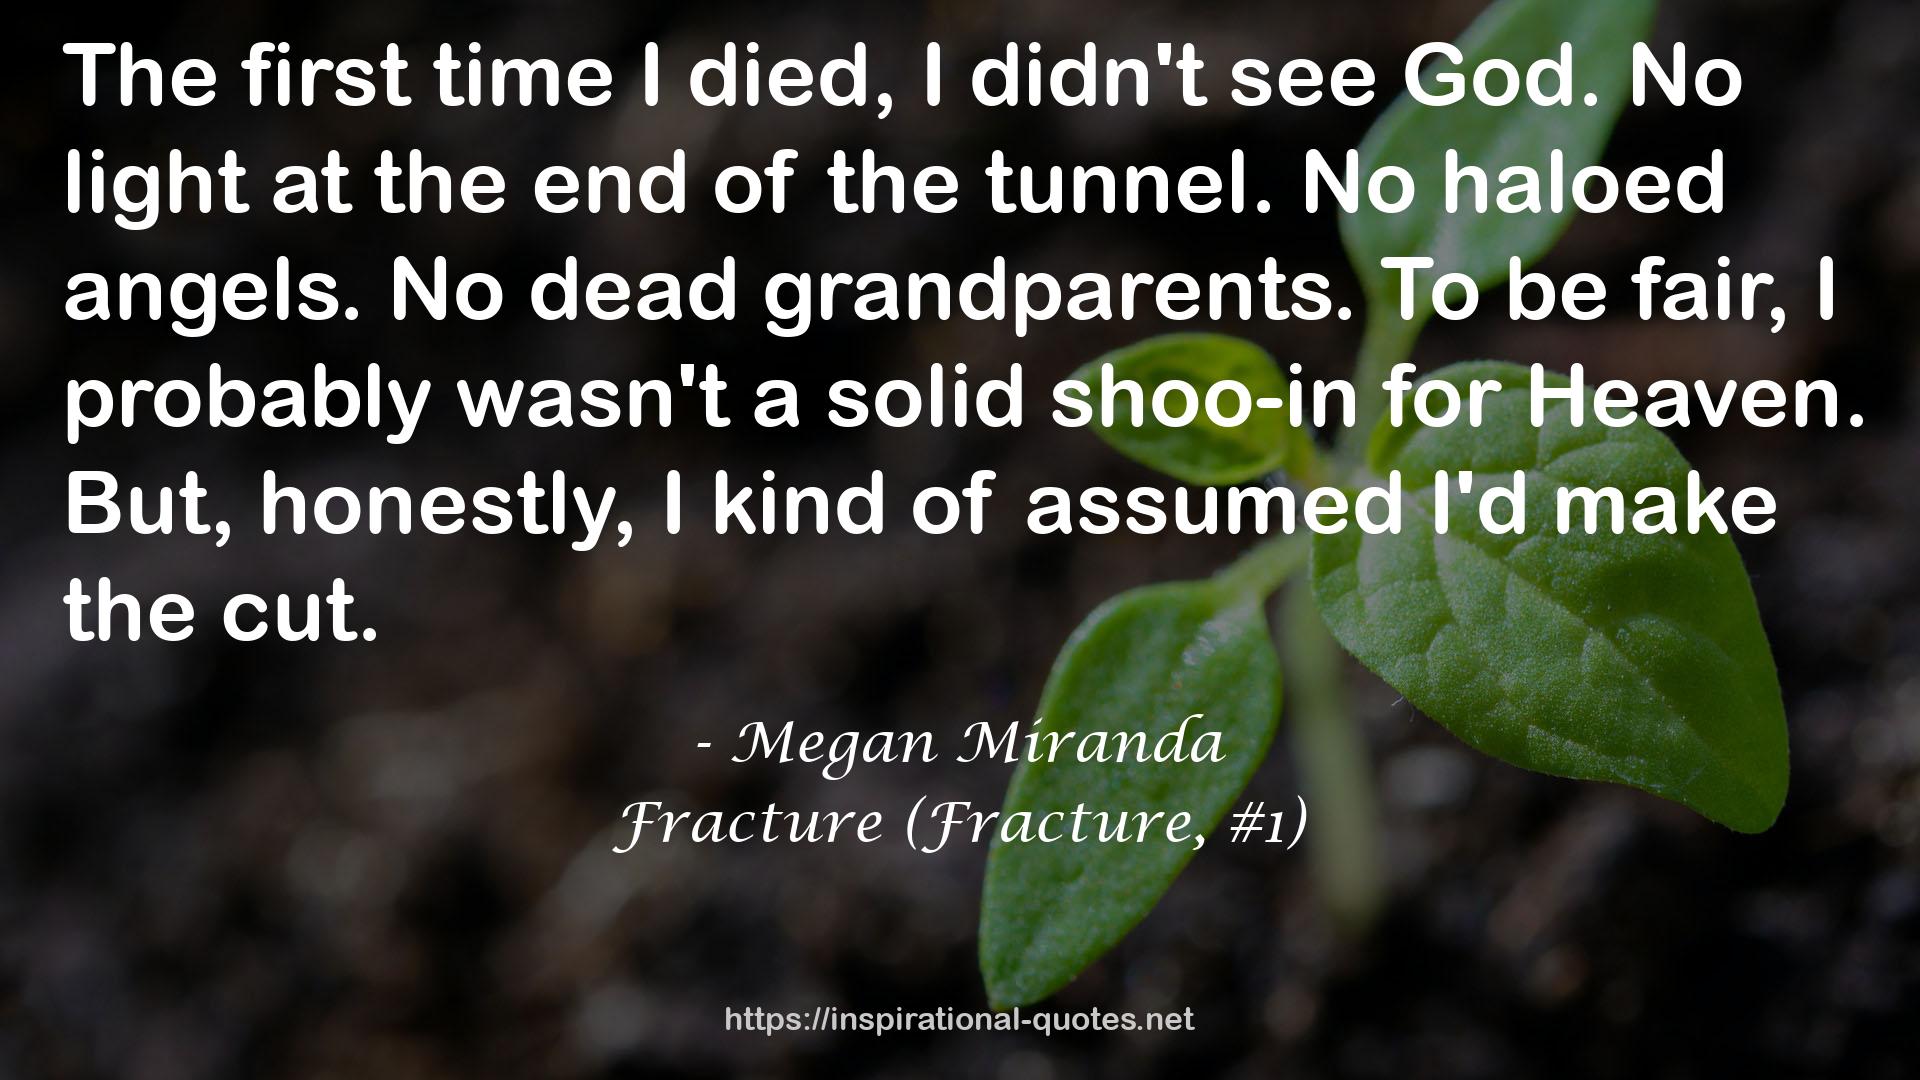 Fracture (Fracture, #1) QUOTES